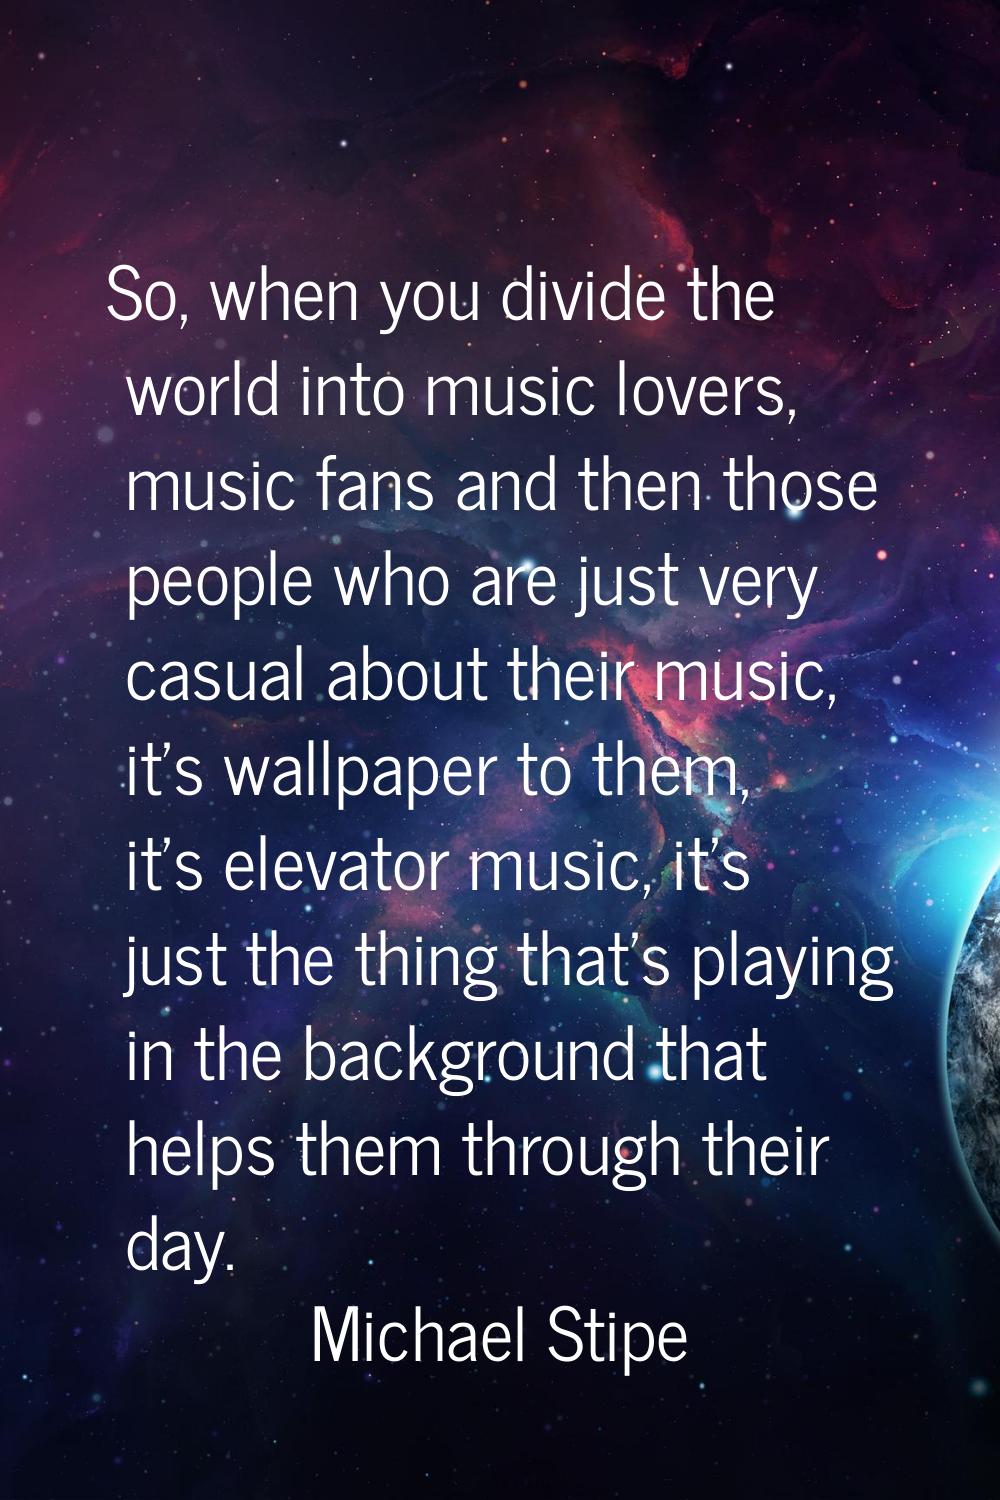 So, when you divide the world into music lovers, music fans and then those people who are just very